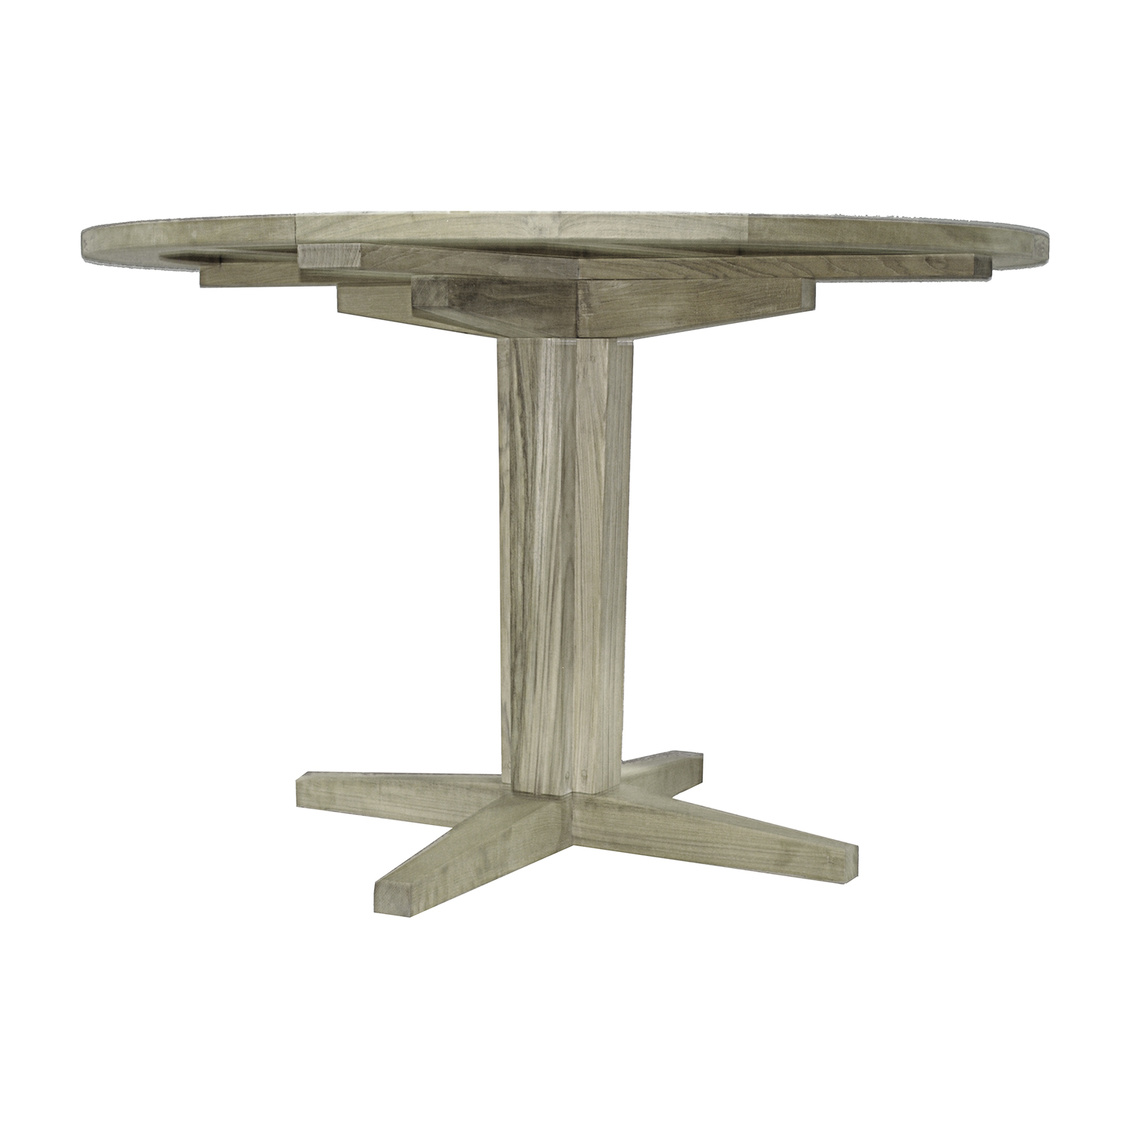 club teak 48 inch round dining table in oyster teak top (w/ hole) with oyster teak club teak pedestal base product image